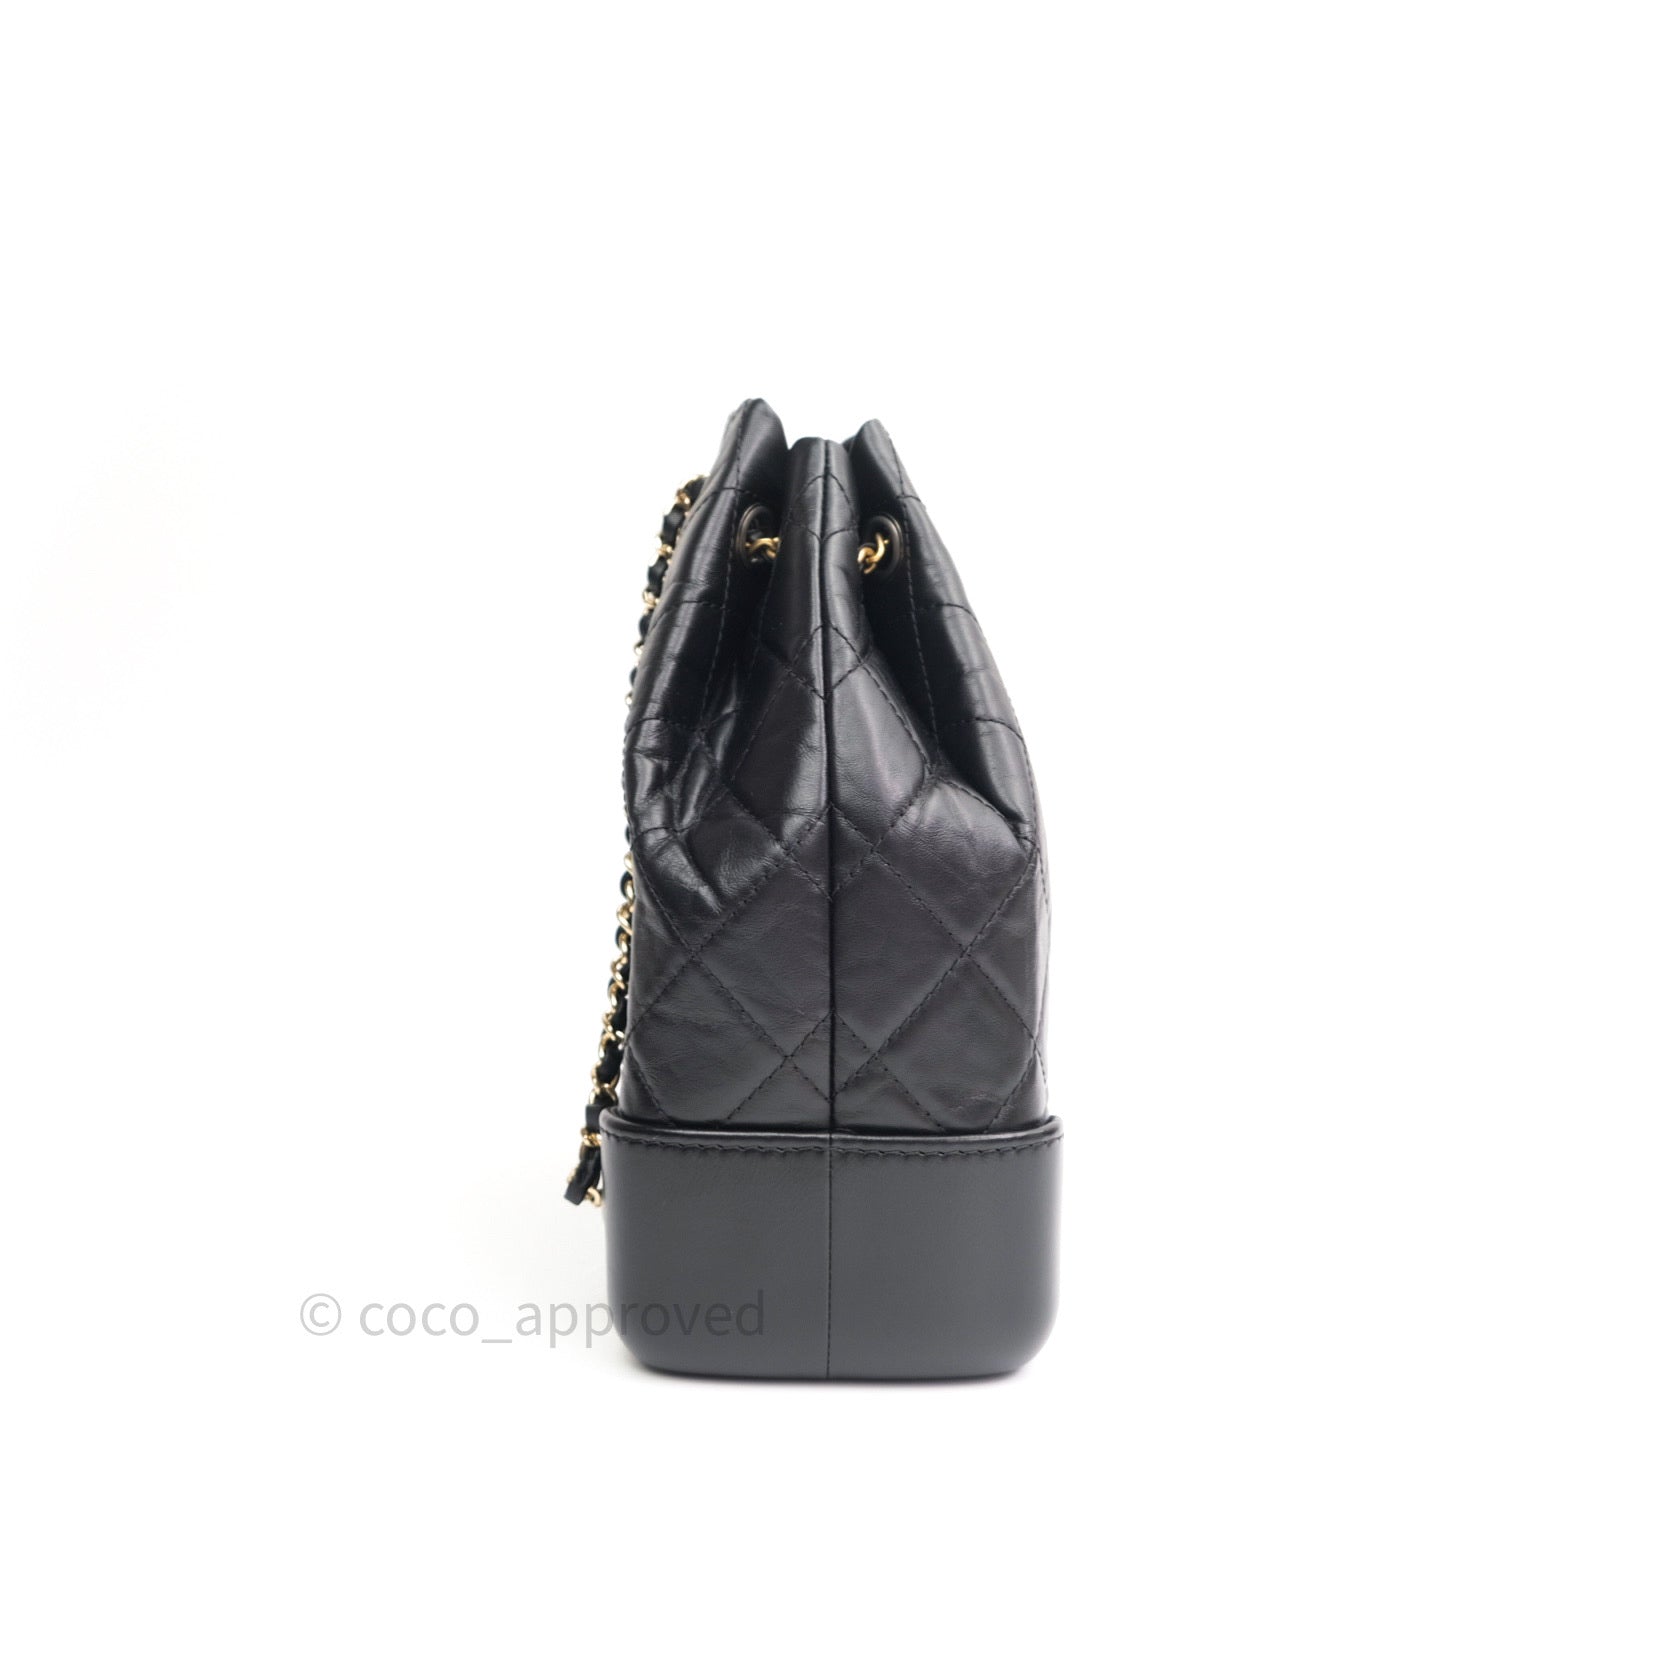 Chanel Backpack, Gabrielle, Black Calfskin Leather, Mixed Gold and Silver  Hardware, New in Box